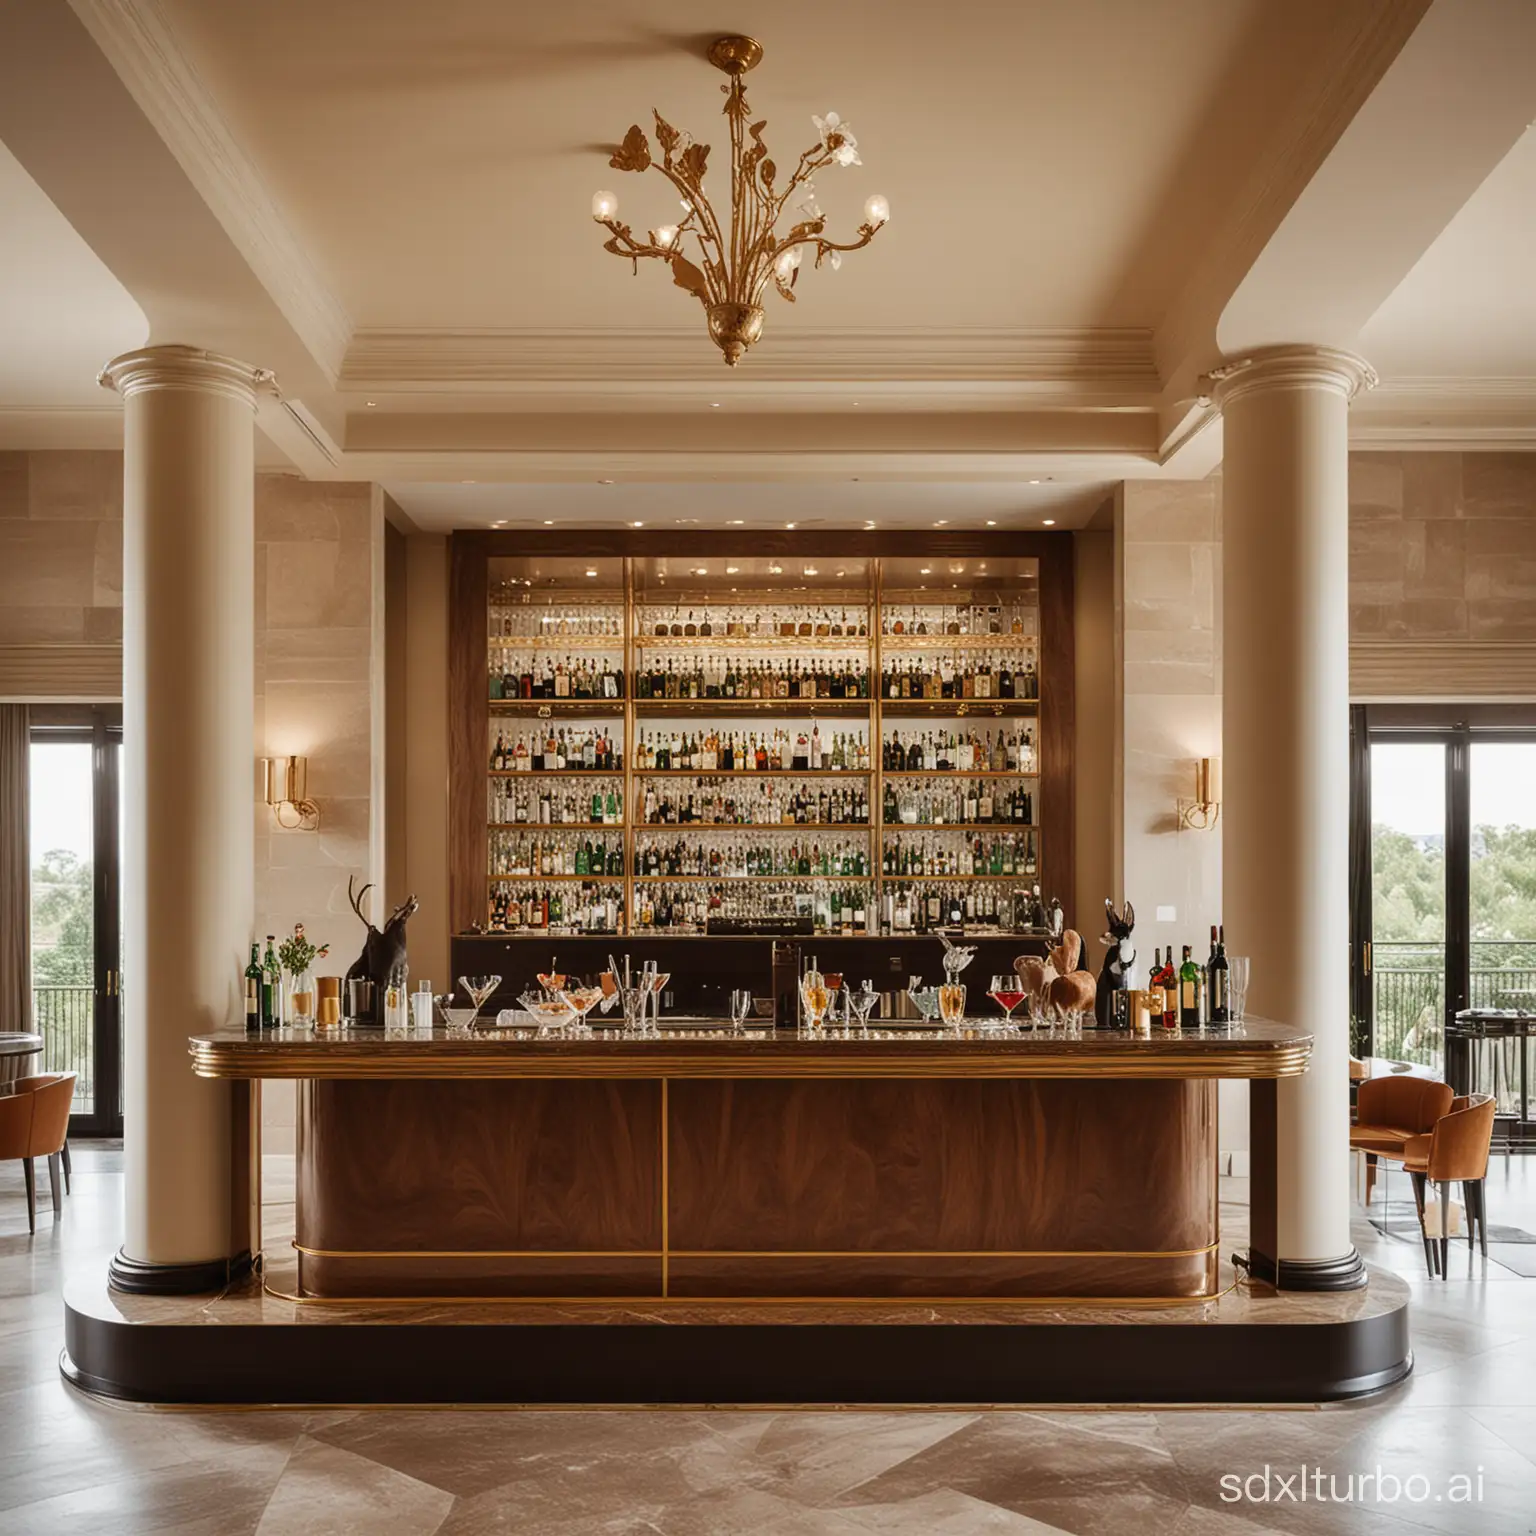 A luxury drinking bar in a luxury hotel, with some animals having drink